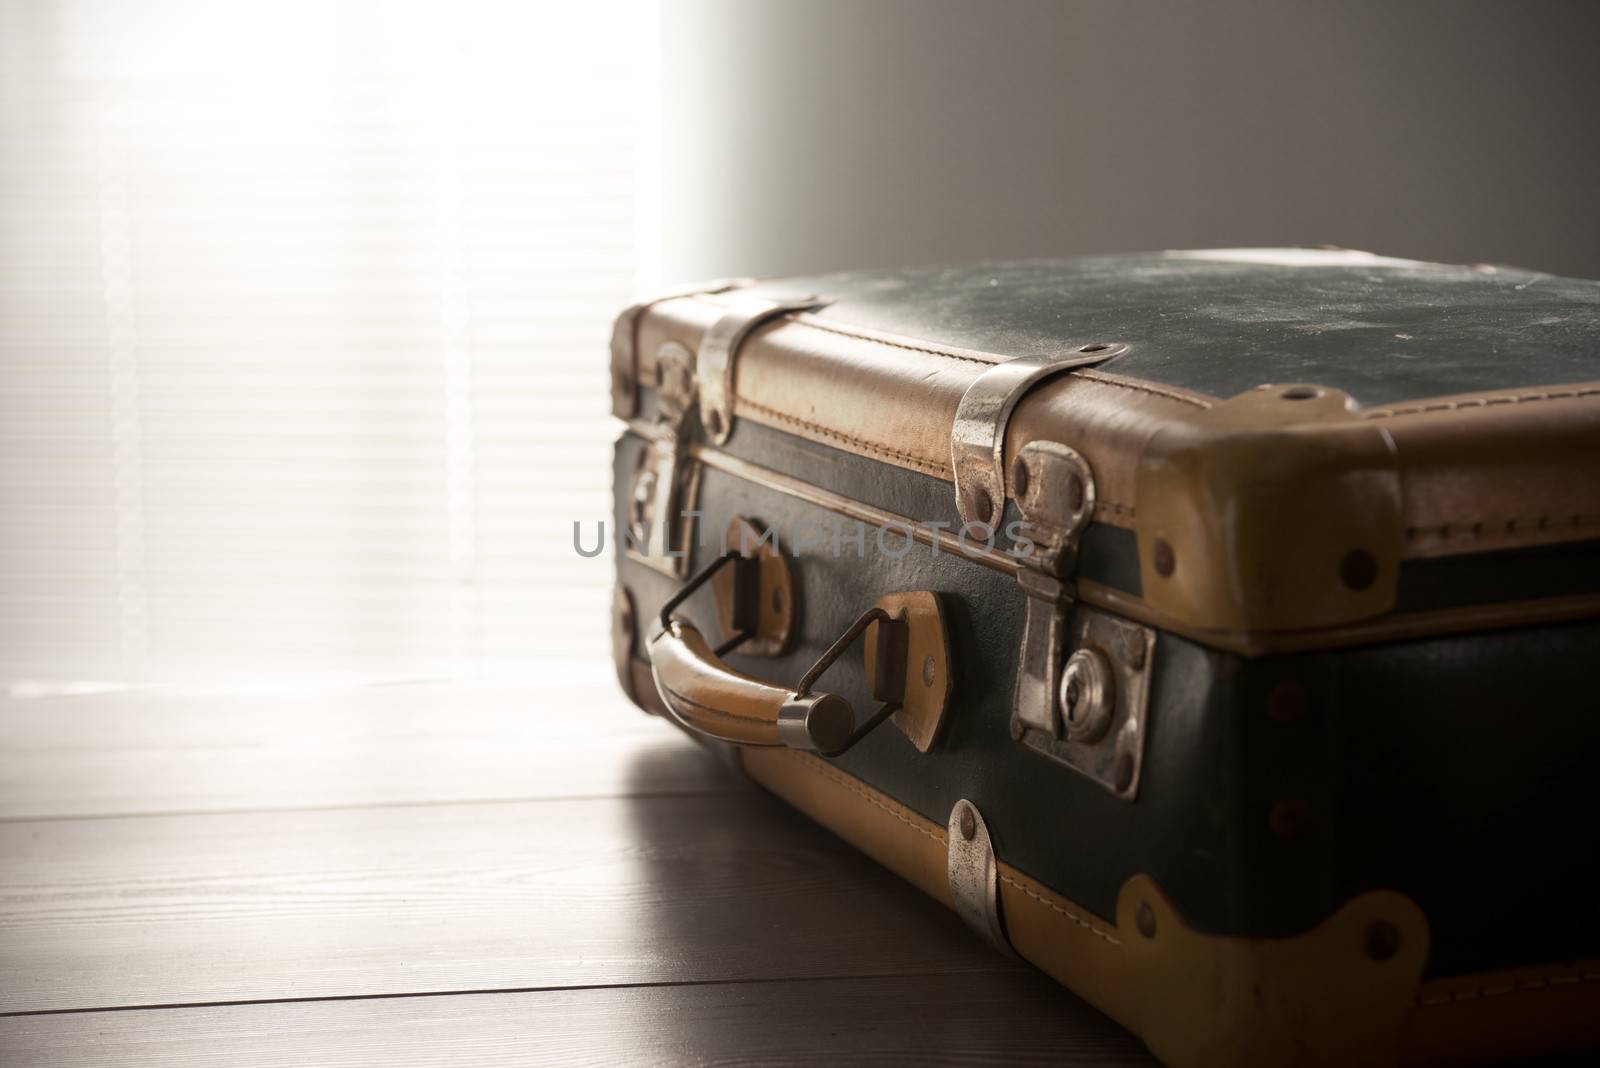 Travelling with a vintage suitcase by stokkete